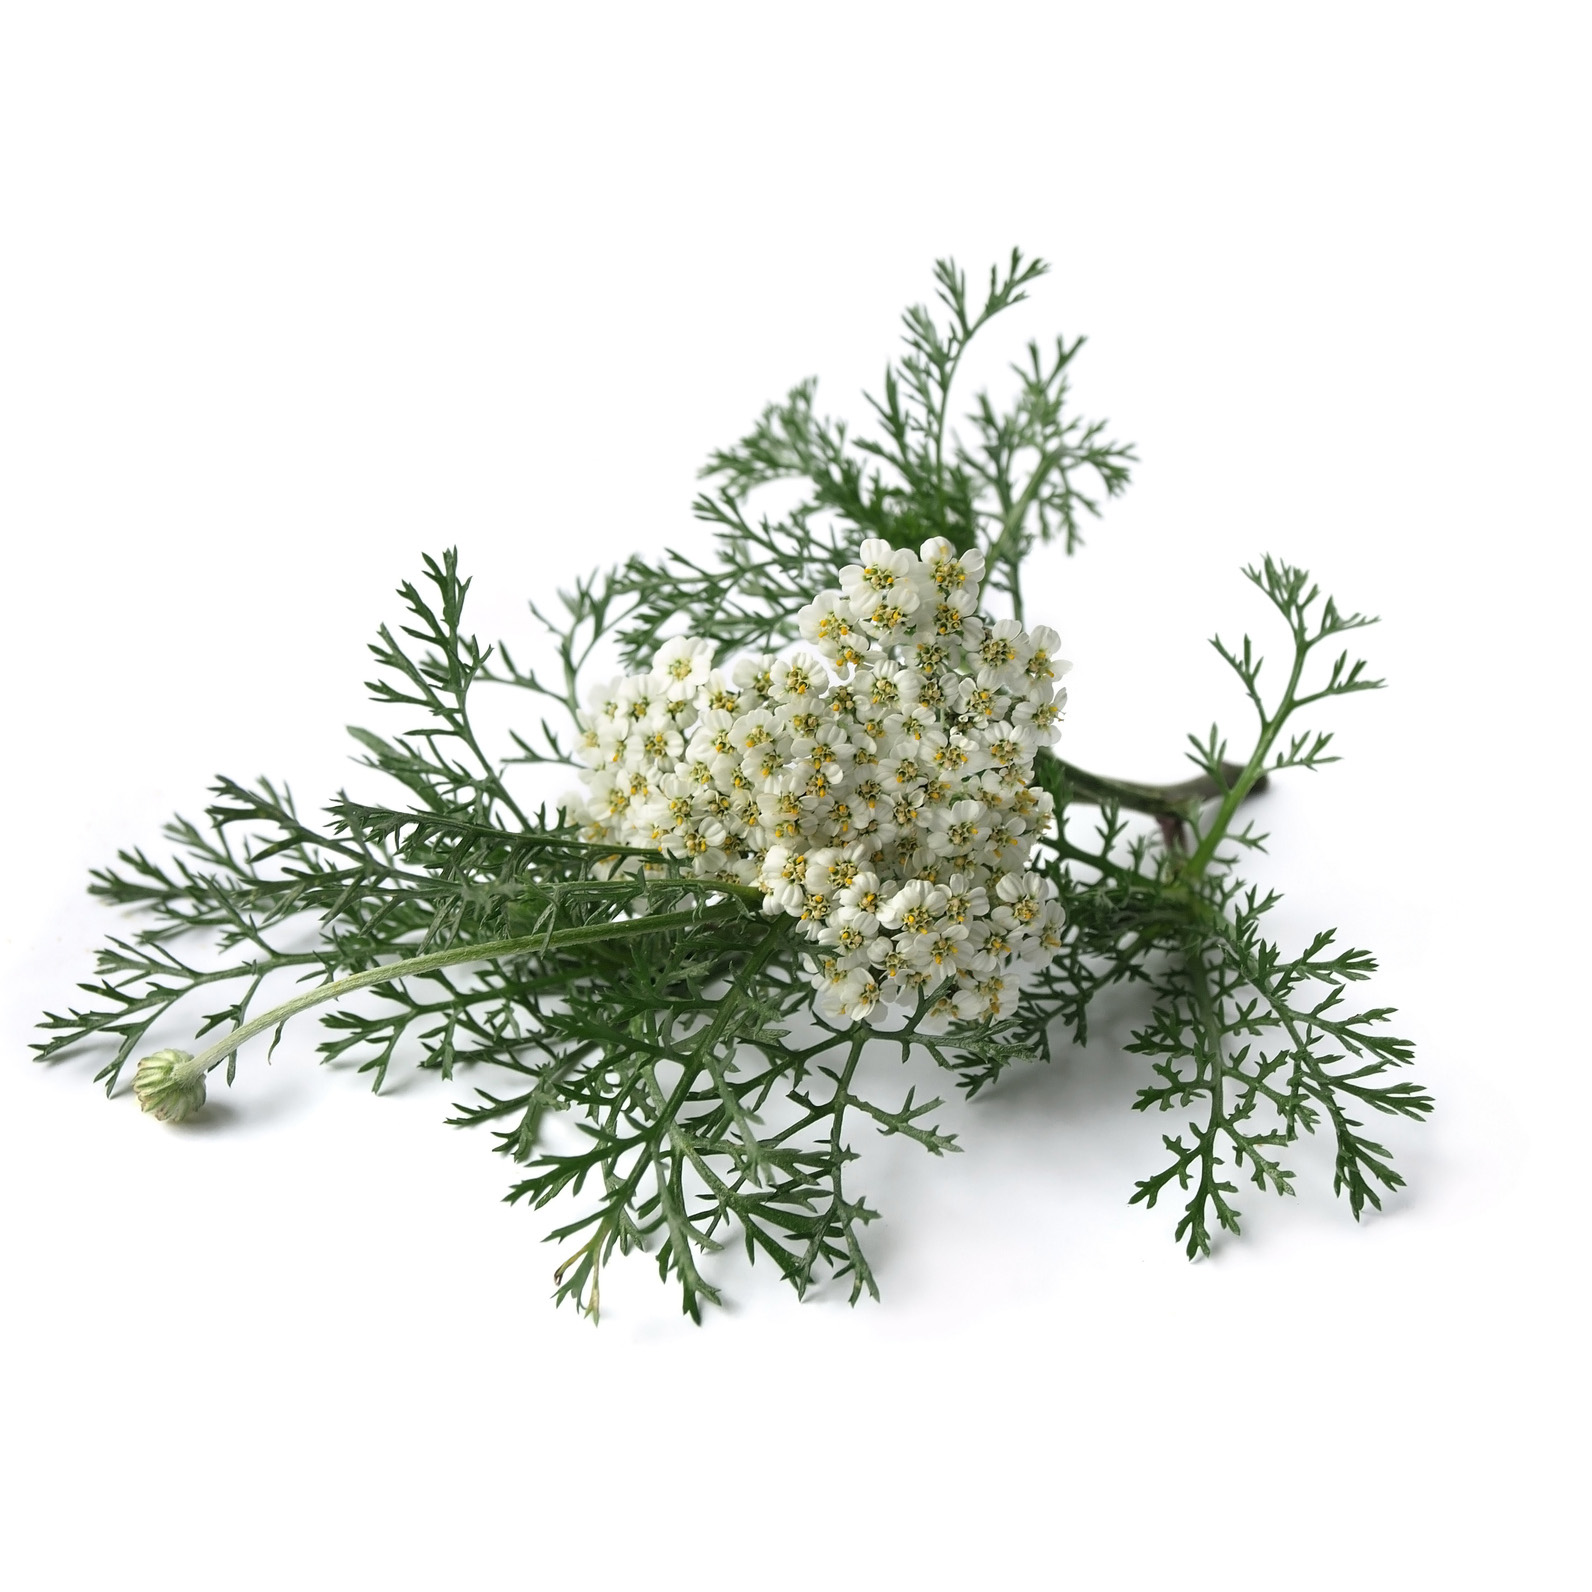 Marsh Rosemary is one of the classic Gruit herbs, used since the Middle Ages in beer brewing. Traditionally used as a remedy for puncture wounds.